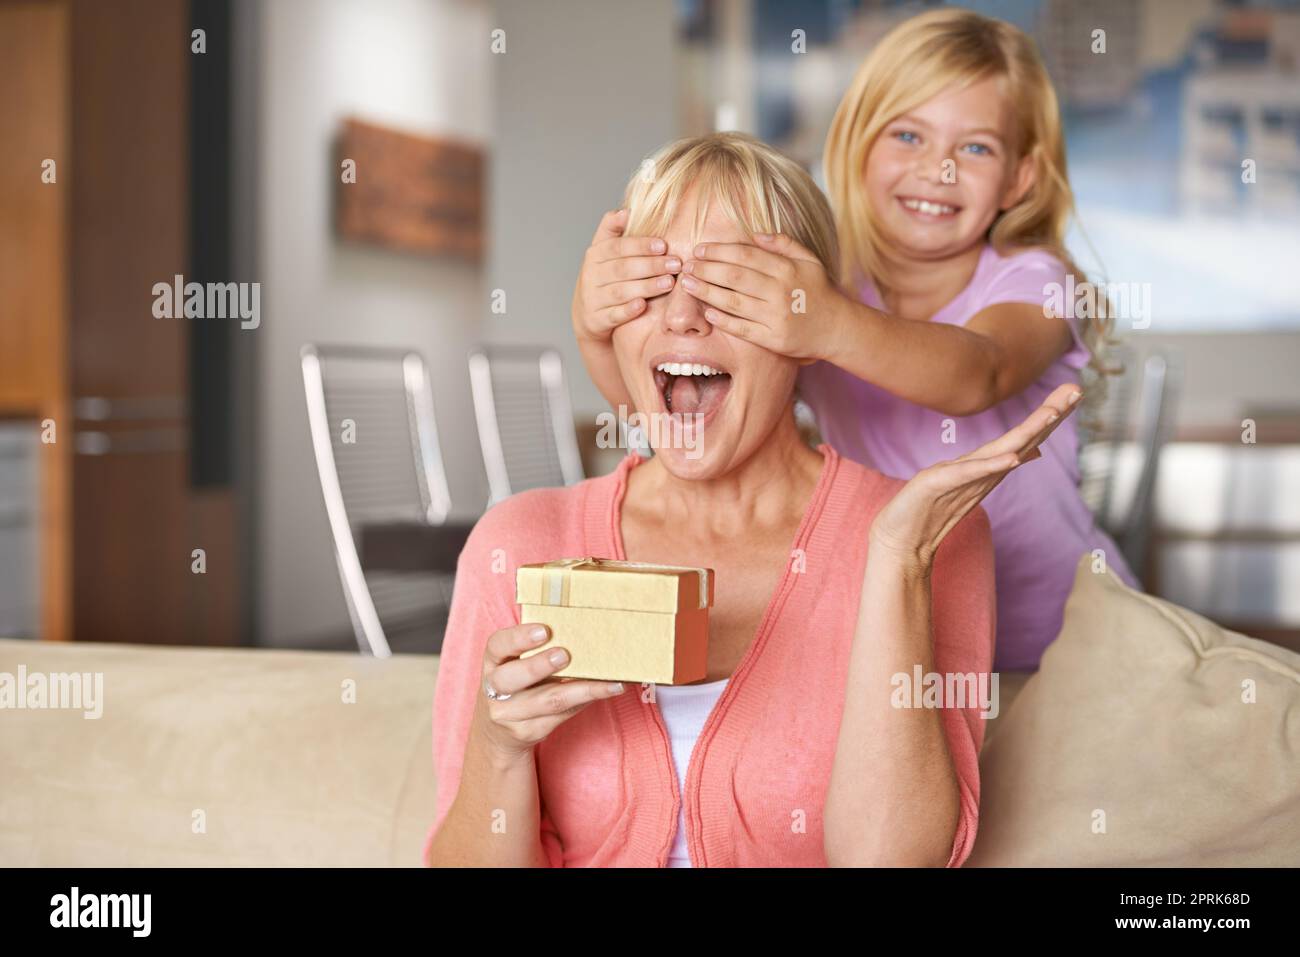 Open your hands and close your eyes for a big surprise. a young girl surprising her mother with a gift Stock Photo